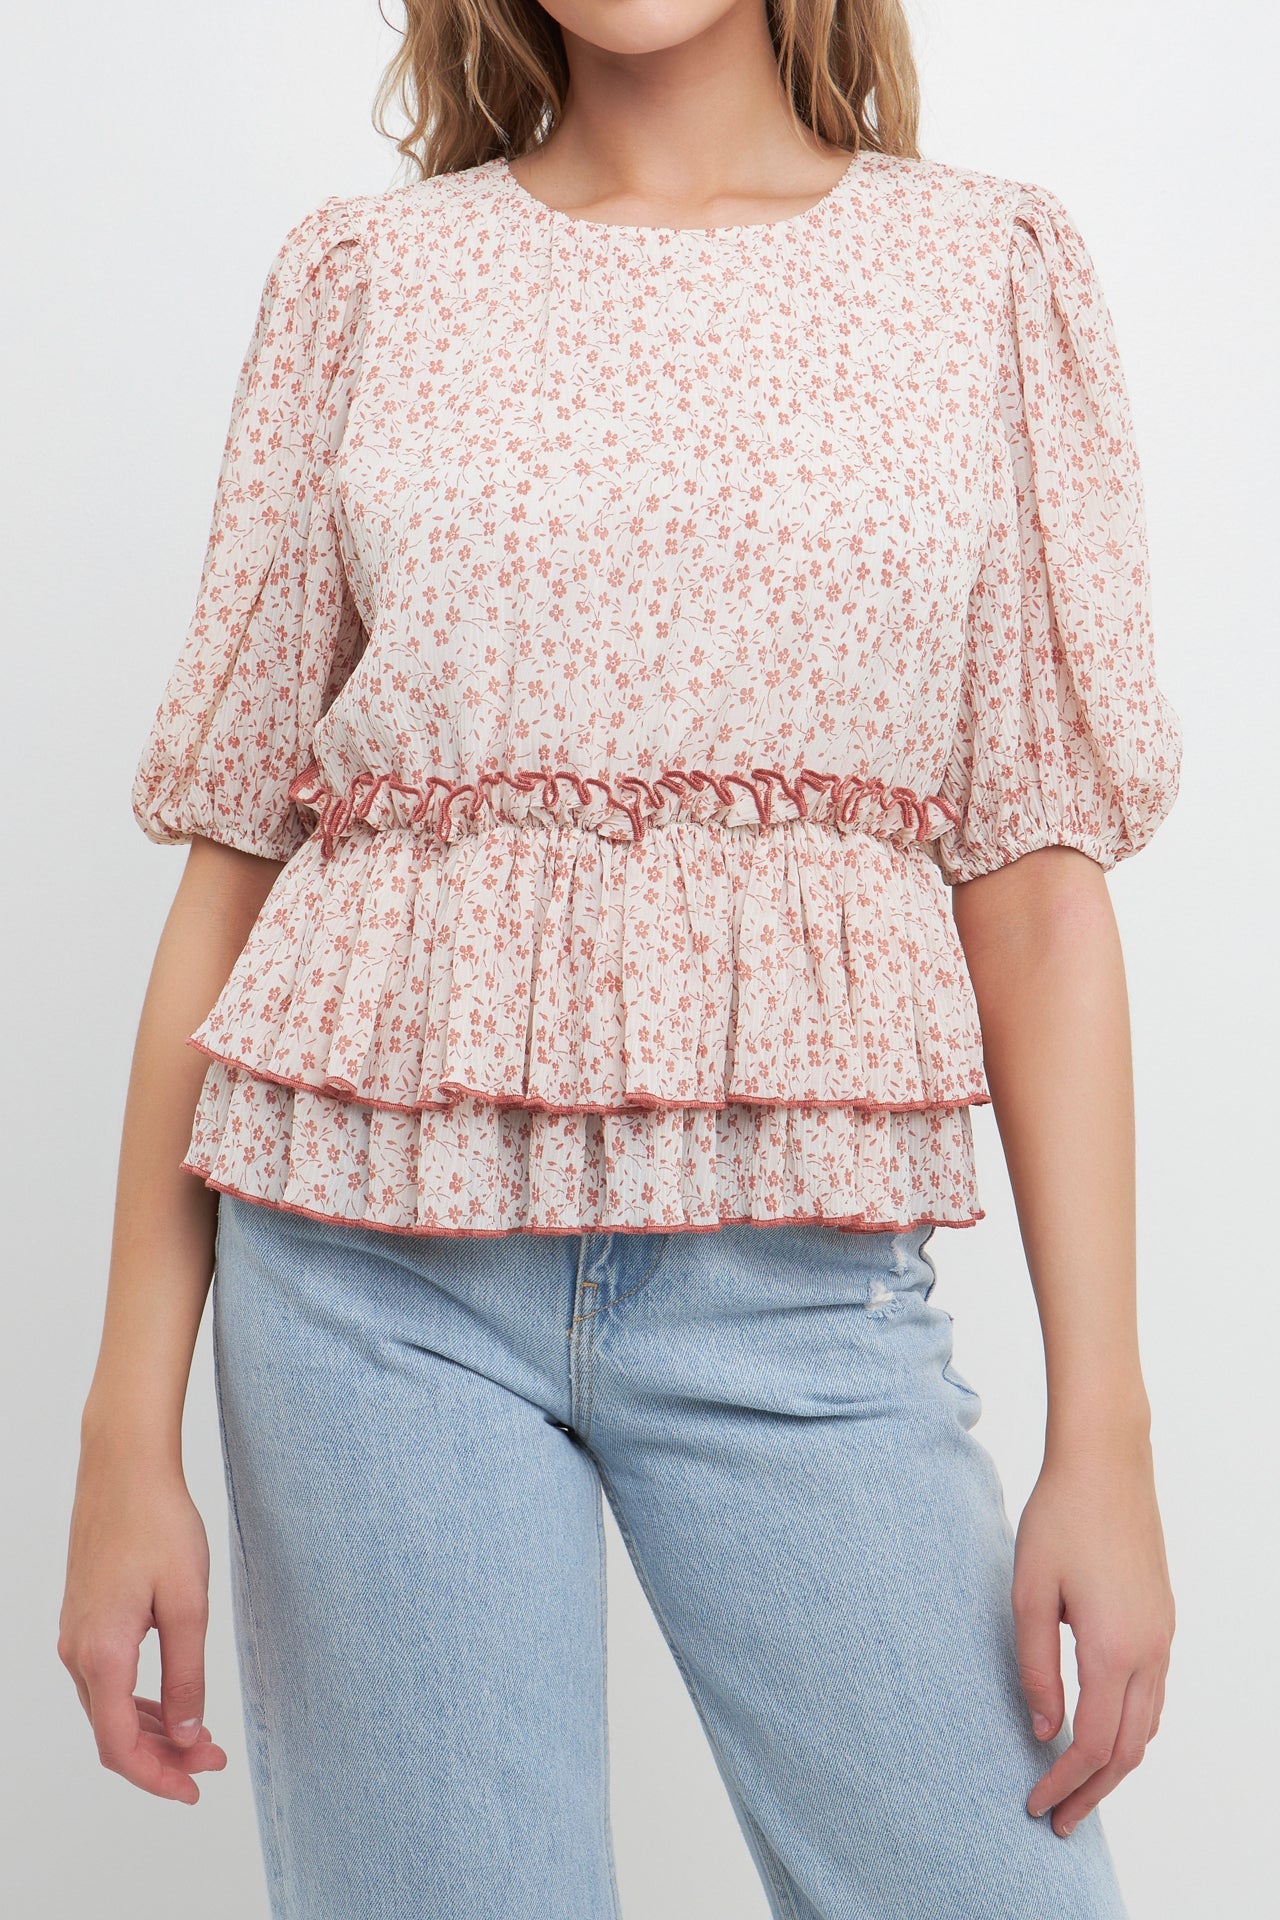 FREE THE ROSES - Pleated Floral Top - TOPS available at Objectrare